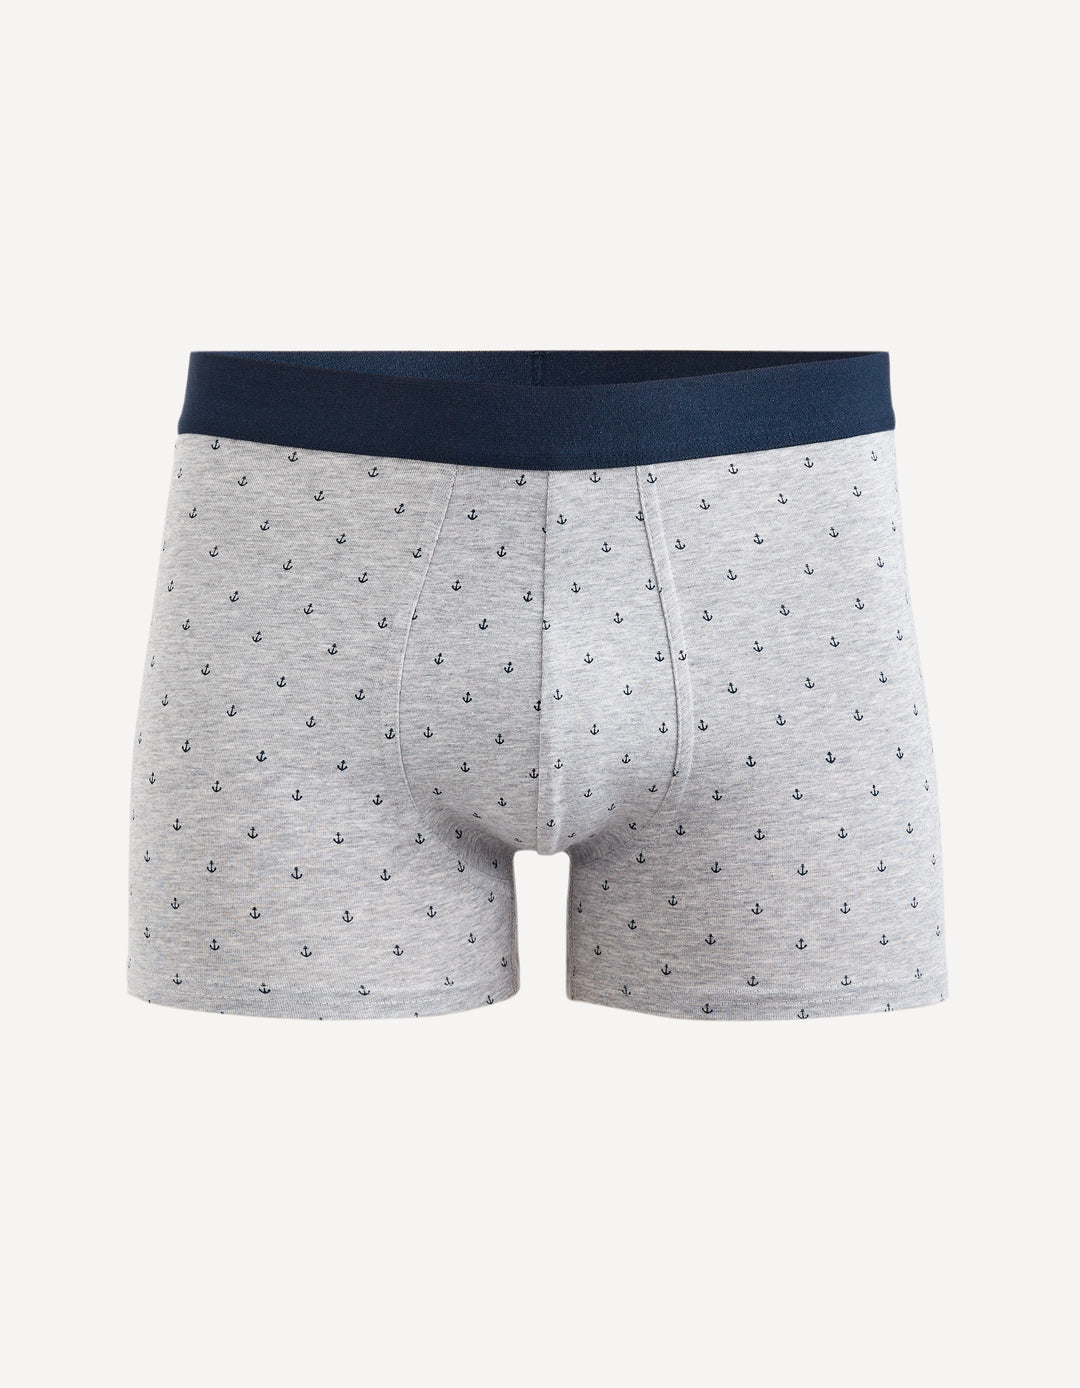 Boxer shorts with stretch cotton ink patterns